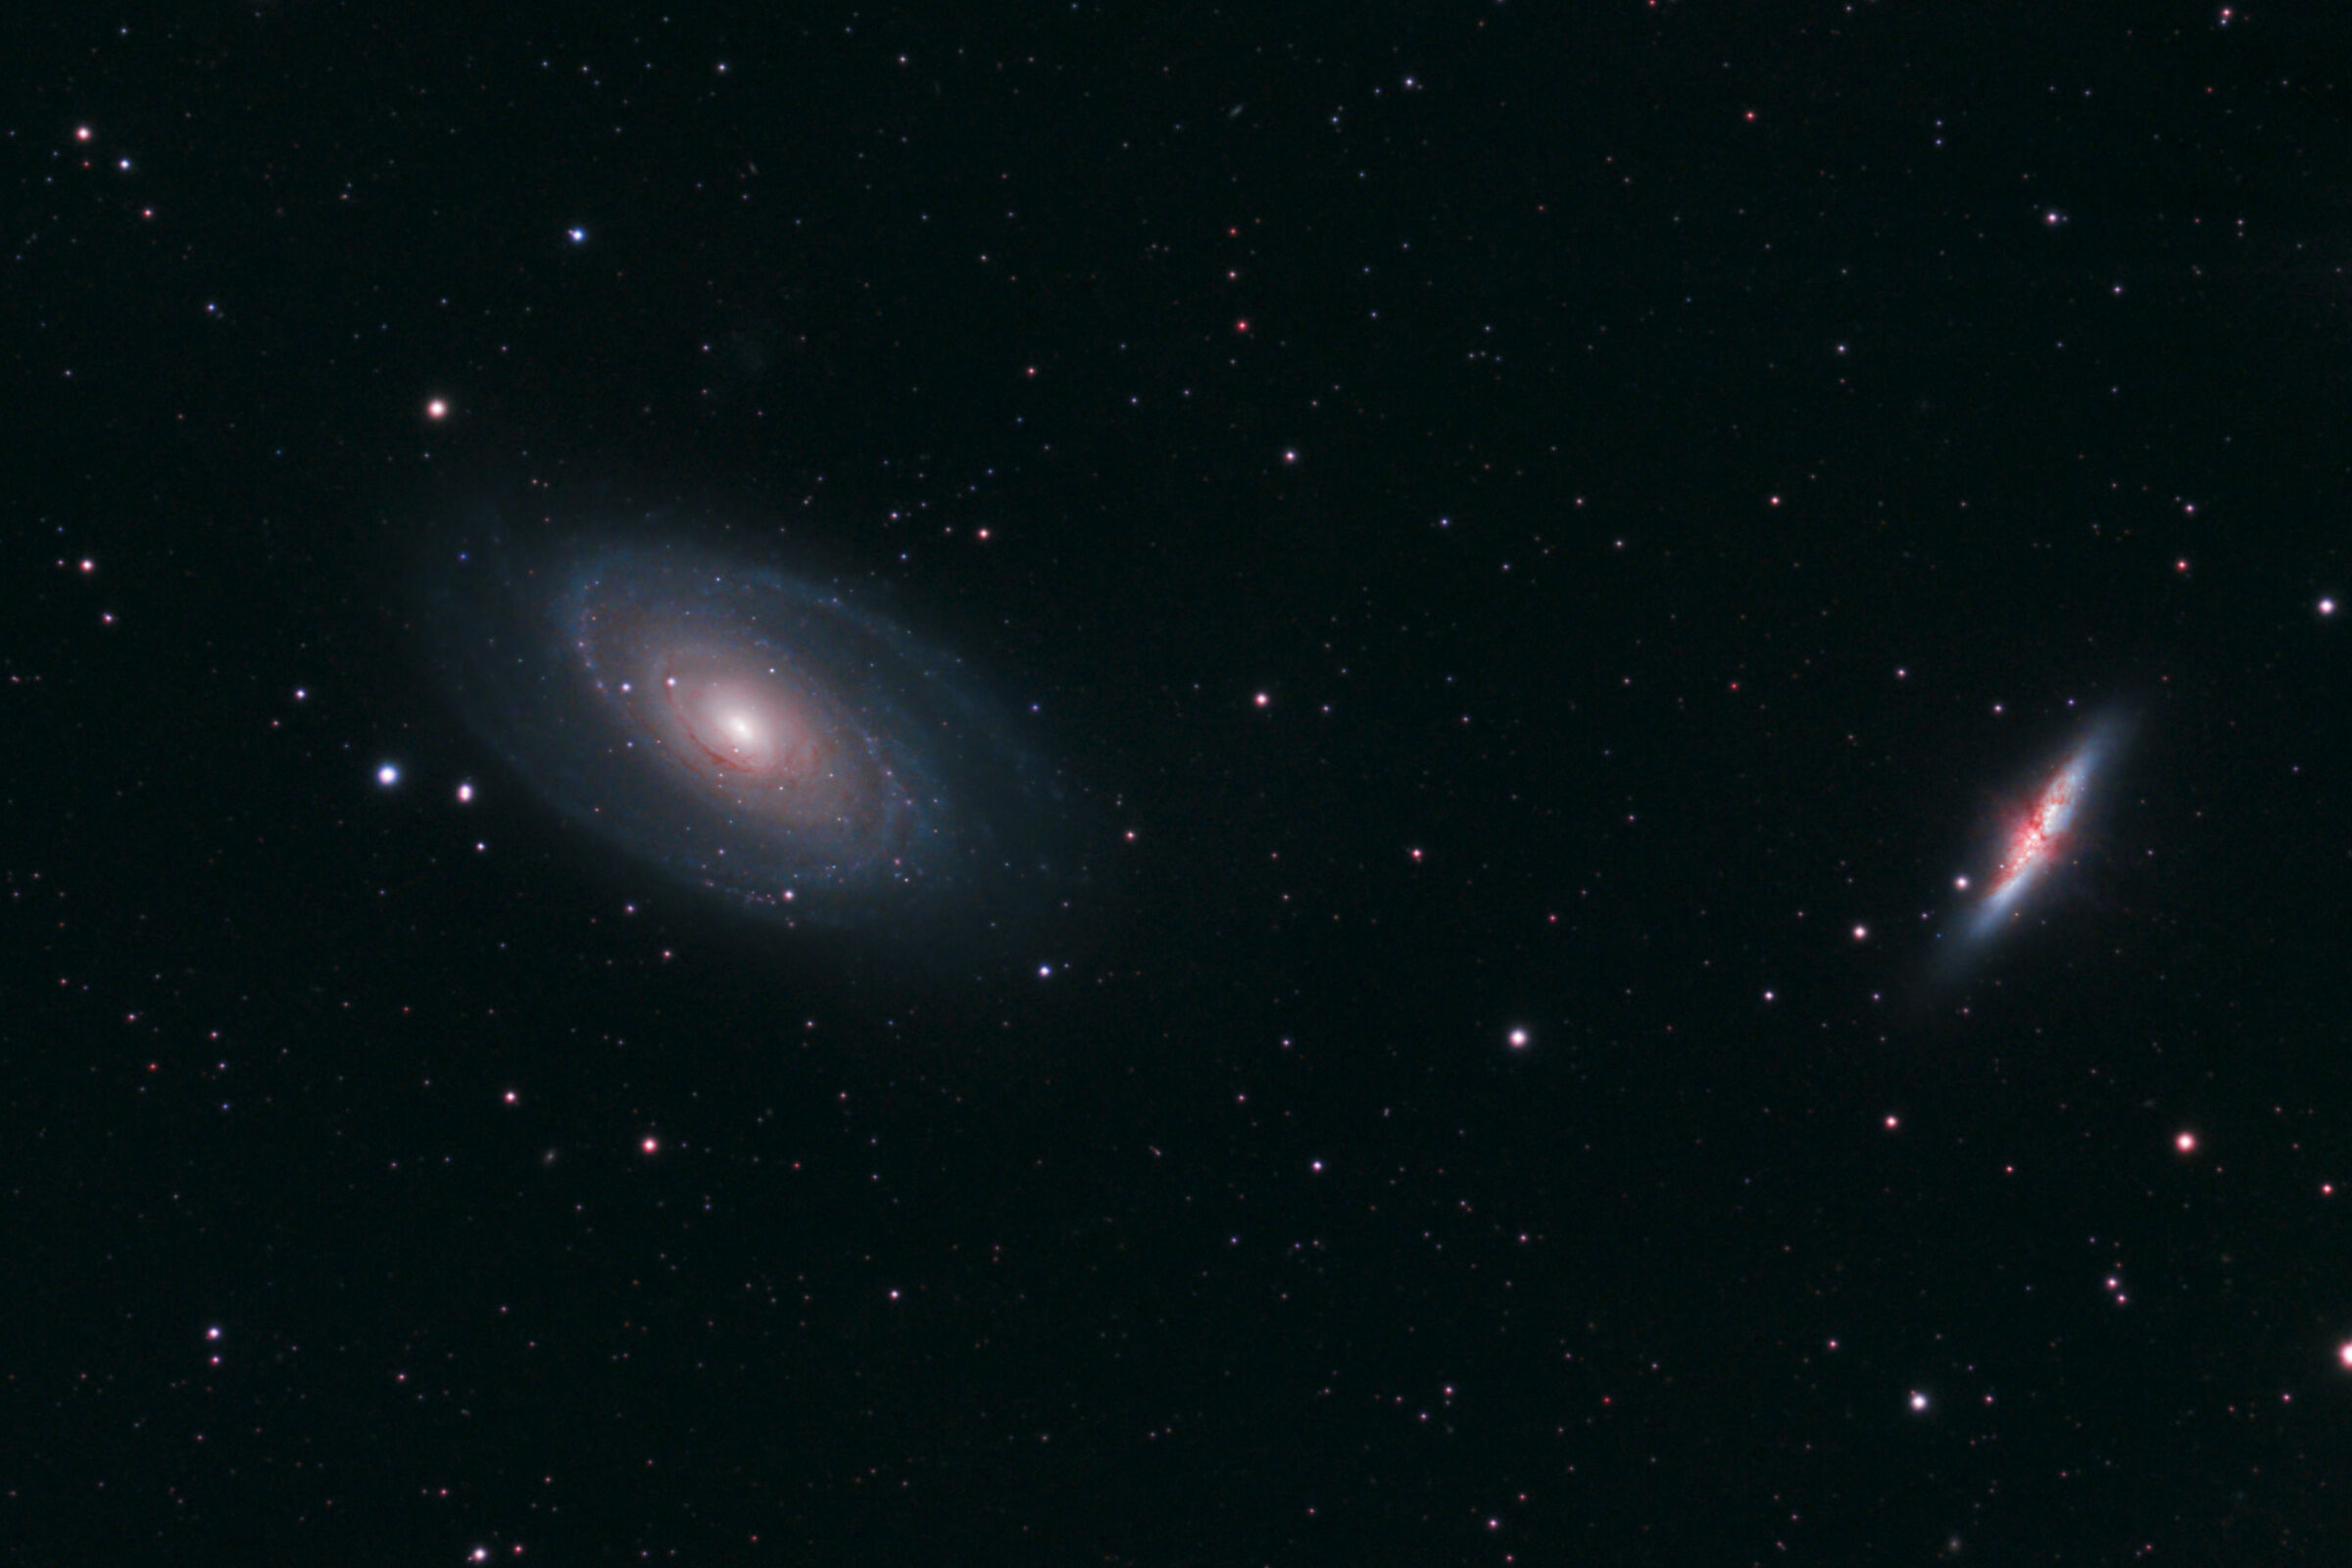 Bode and Cigar galaxies (M81 - M82)...